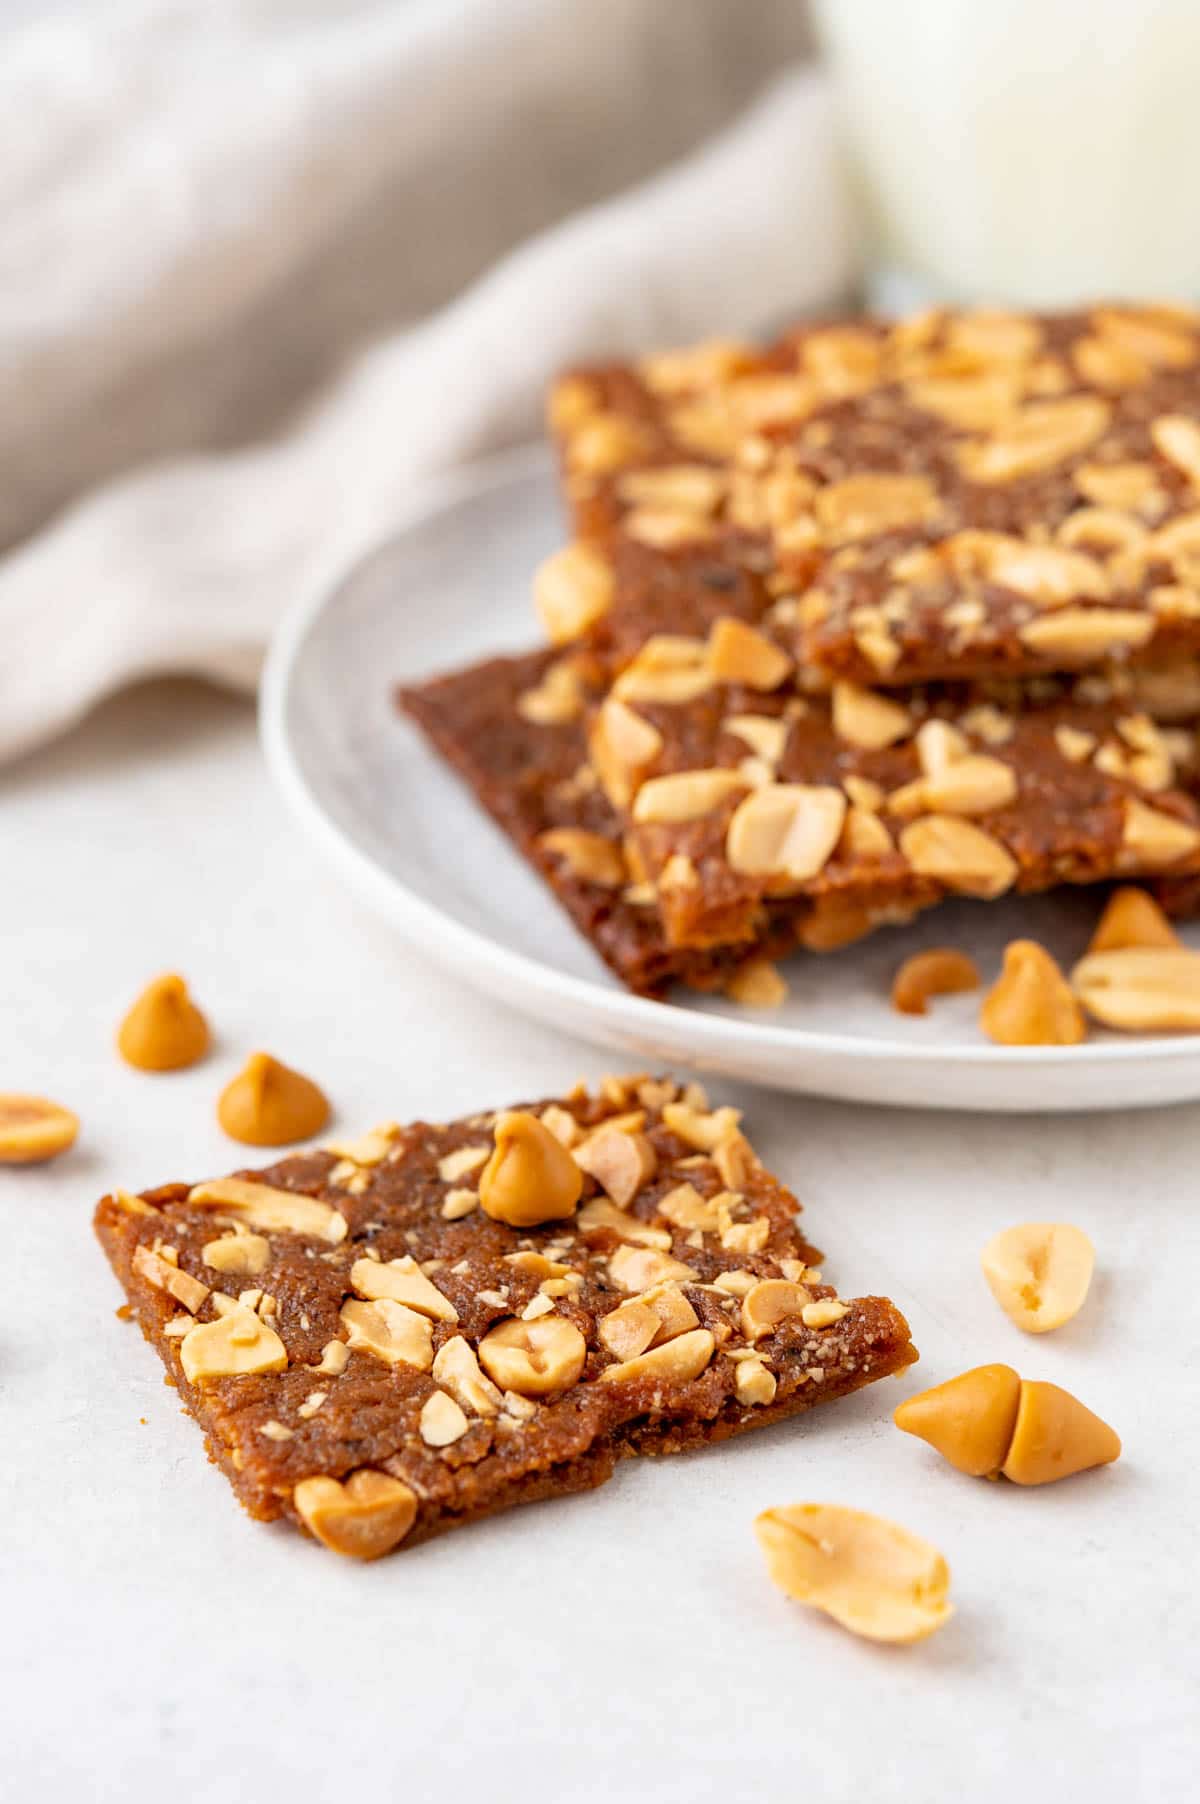 a plate with the peanut bars and extra nuts on top.